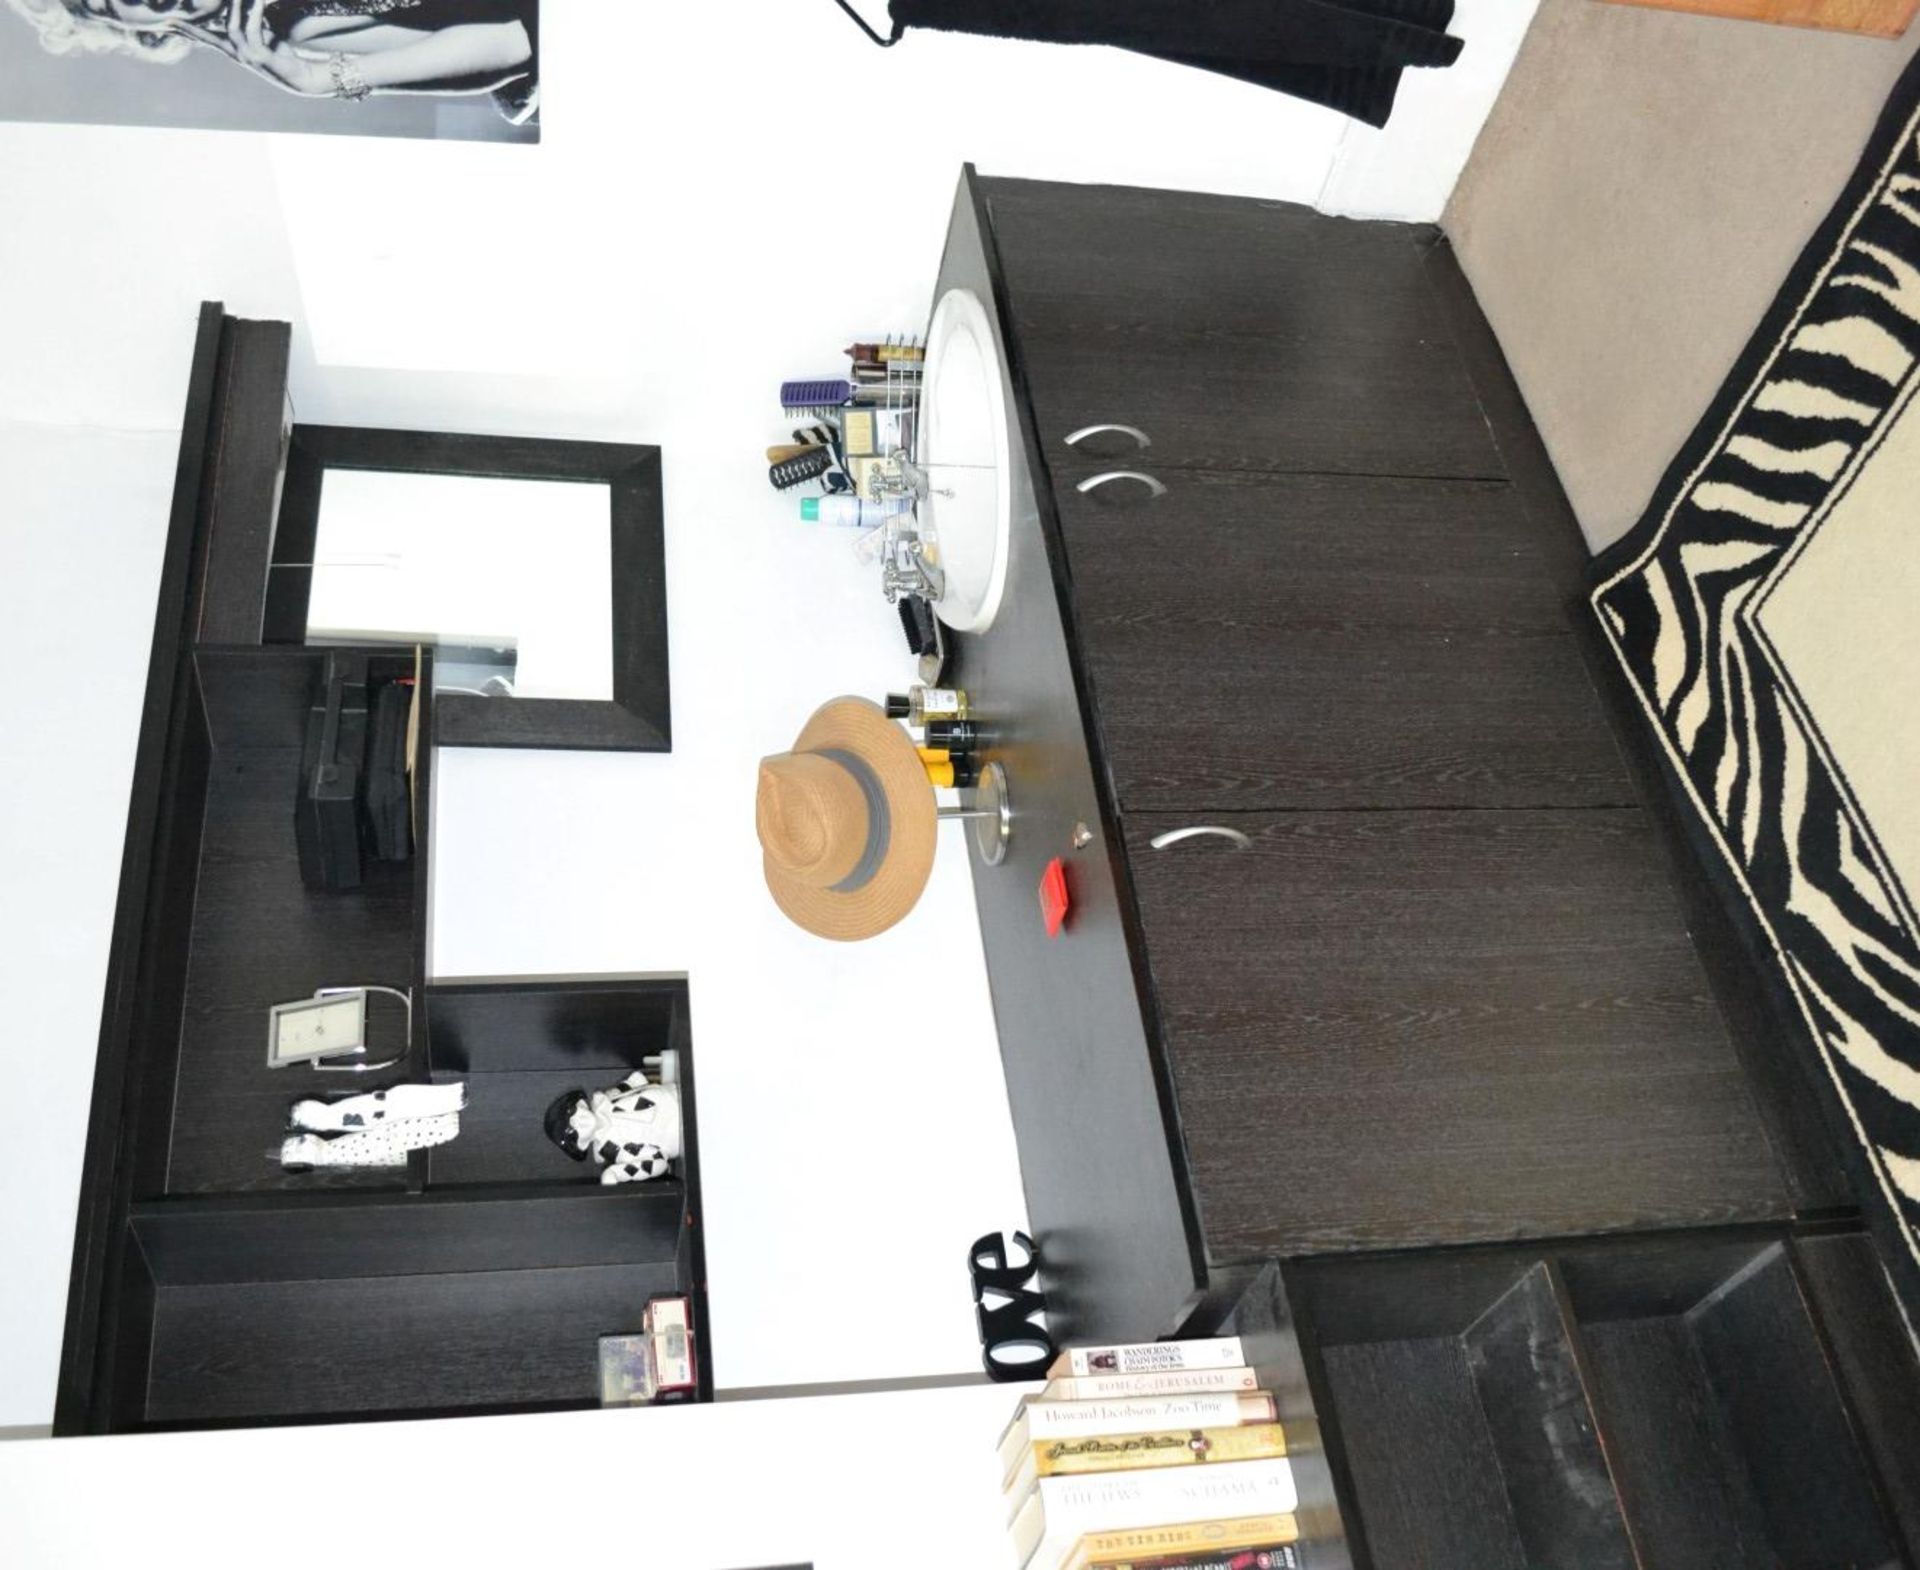 1 x Fitted Bedroom in Black including Bed, Wardrobes and Sink Unit - Lots of Units - CL321 - - Image 17 of 17